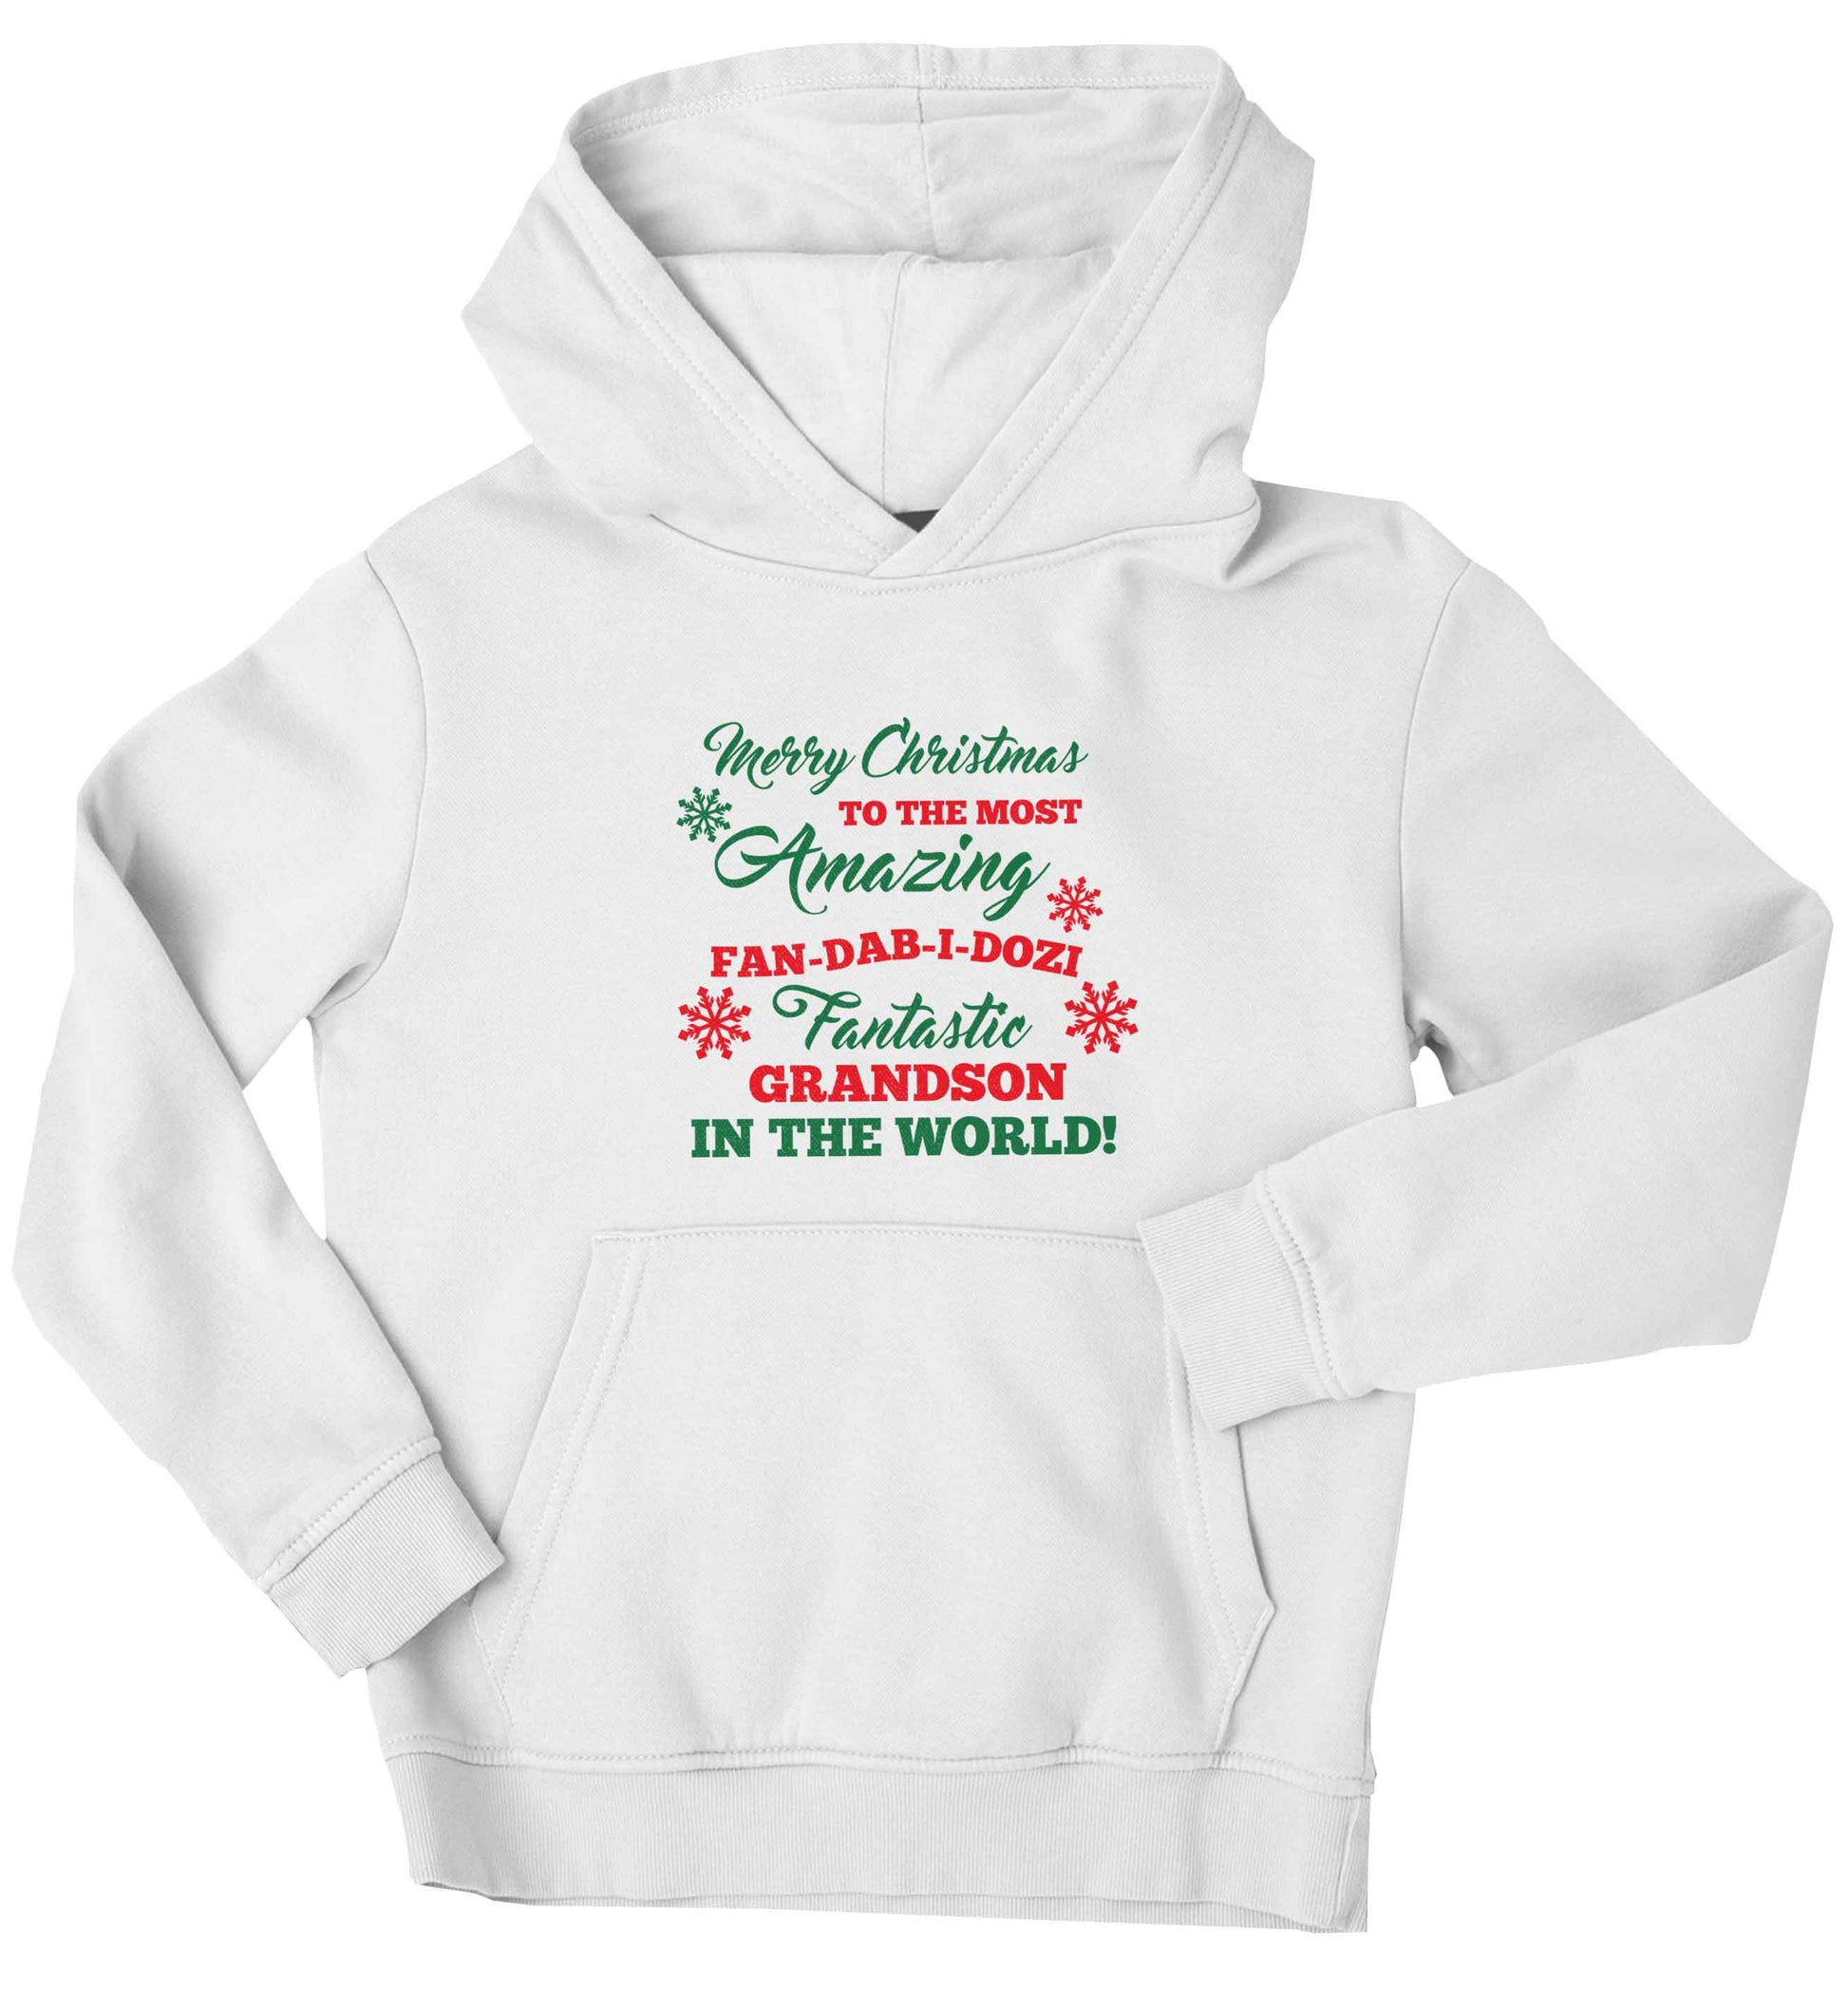 Merry Christmas to the most amazing fan-dab-i-dozi fantasic Grandson in the world children's white hoodie 12-13 Years